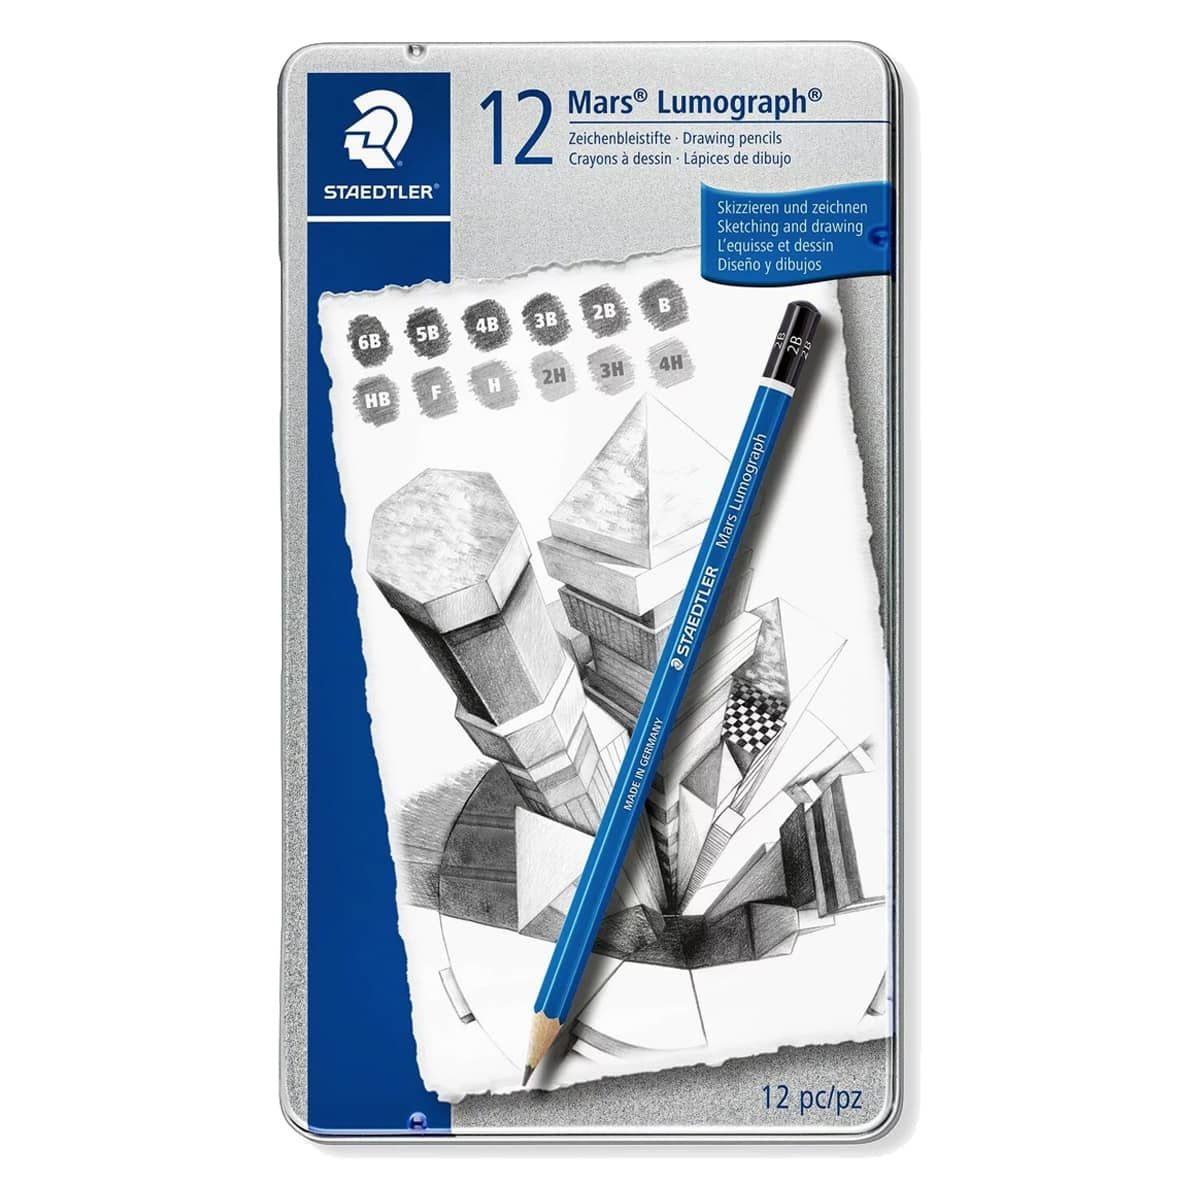 ROCOD Profession Sketch Pencils 6B to 4H for Kids and Adults Drawing, Art  Graphite Pencil for Artists Beginner Sketching